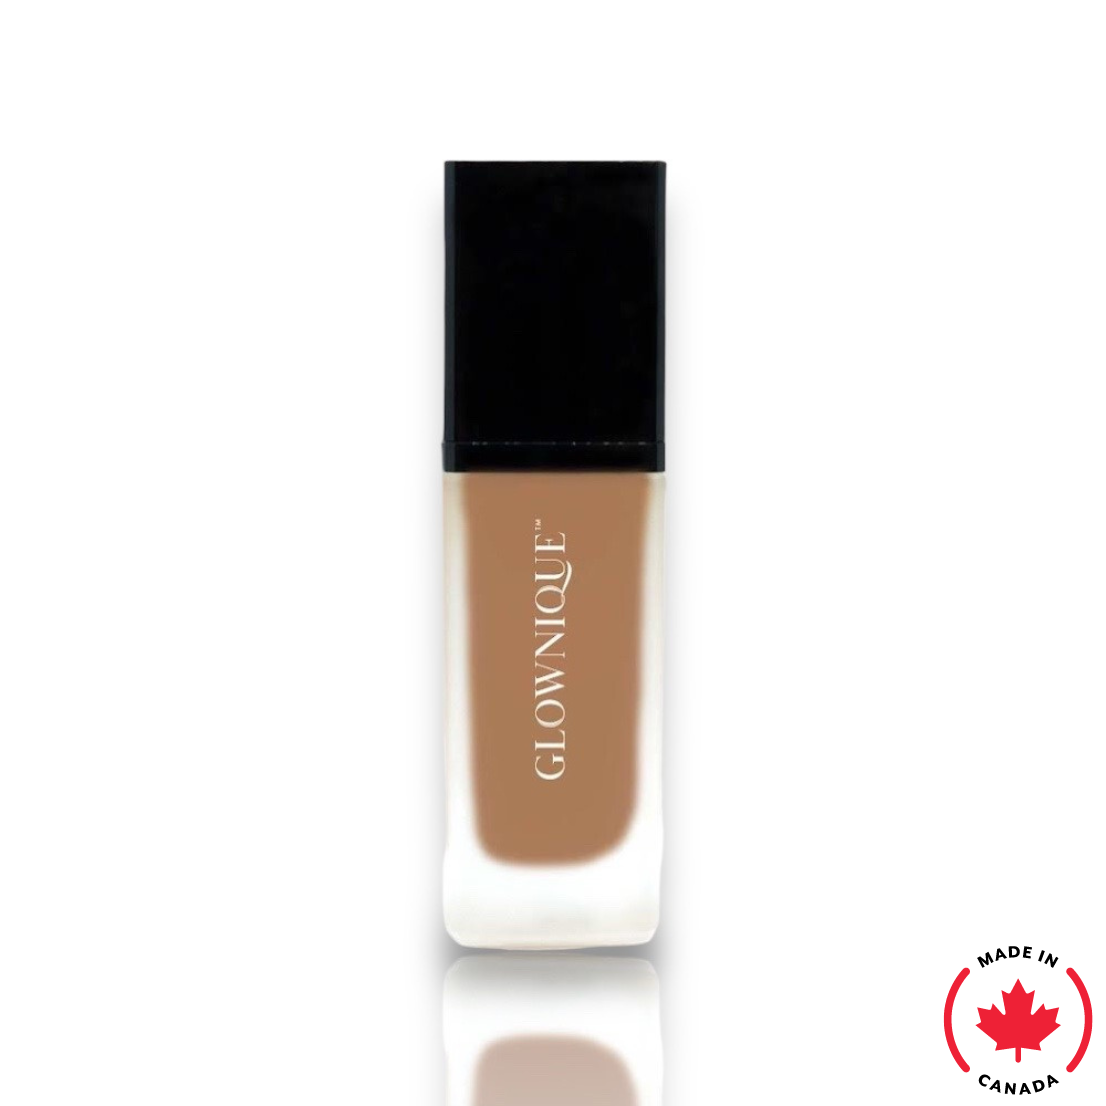 Foundation with SPF - Rich Caramel | GLOWNIQUE